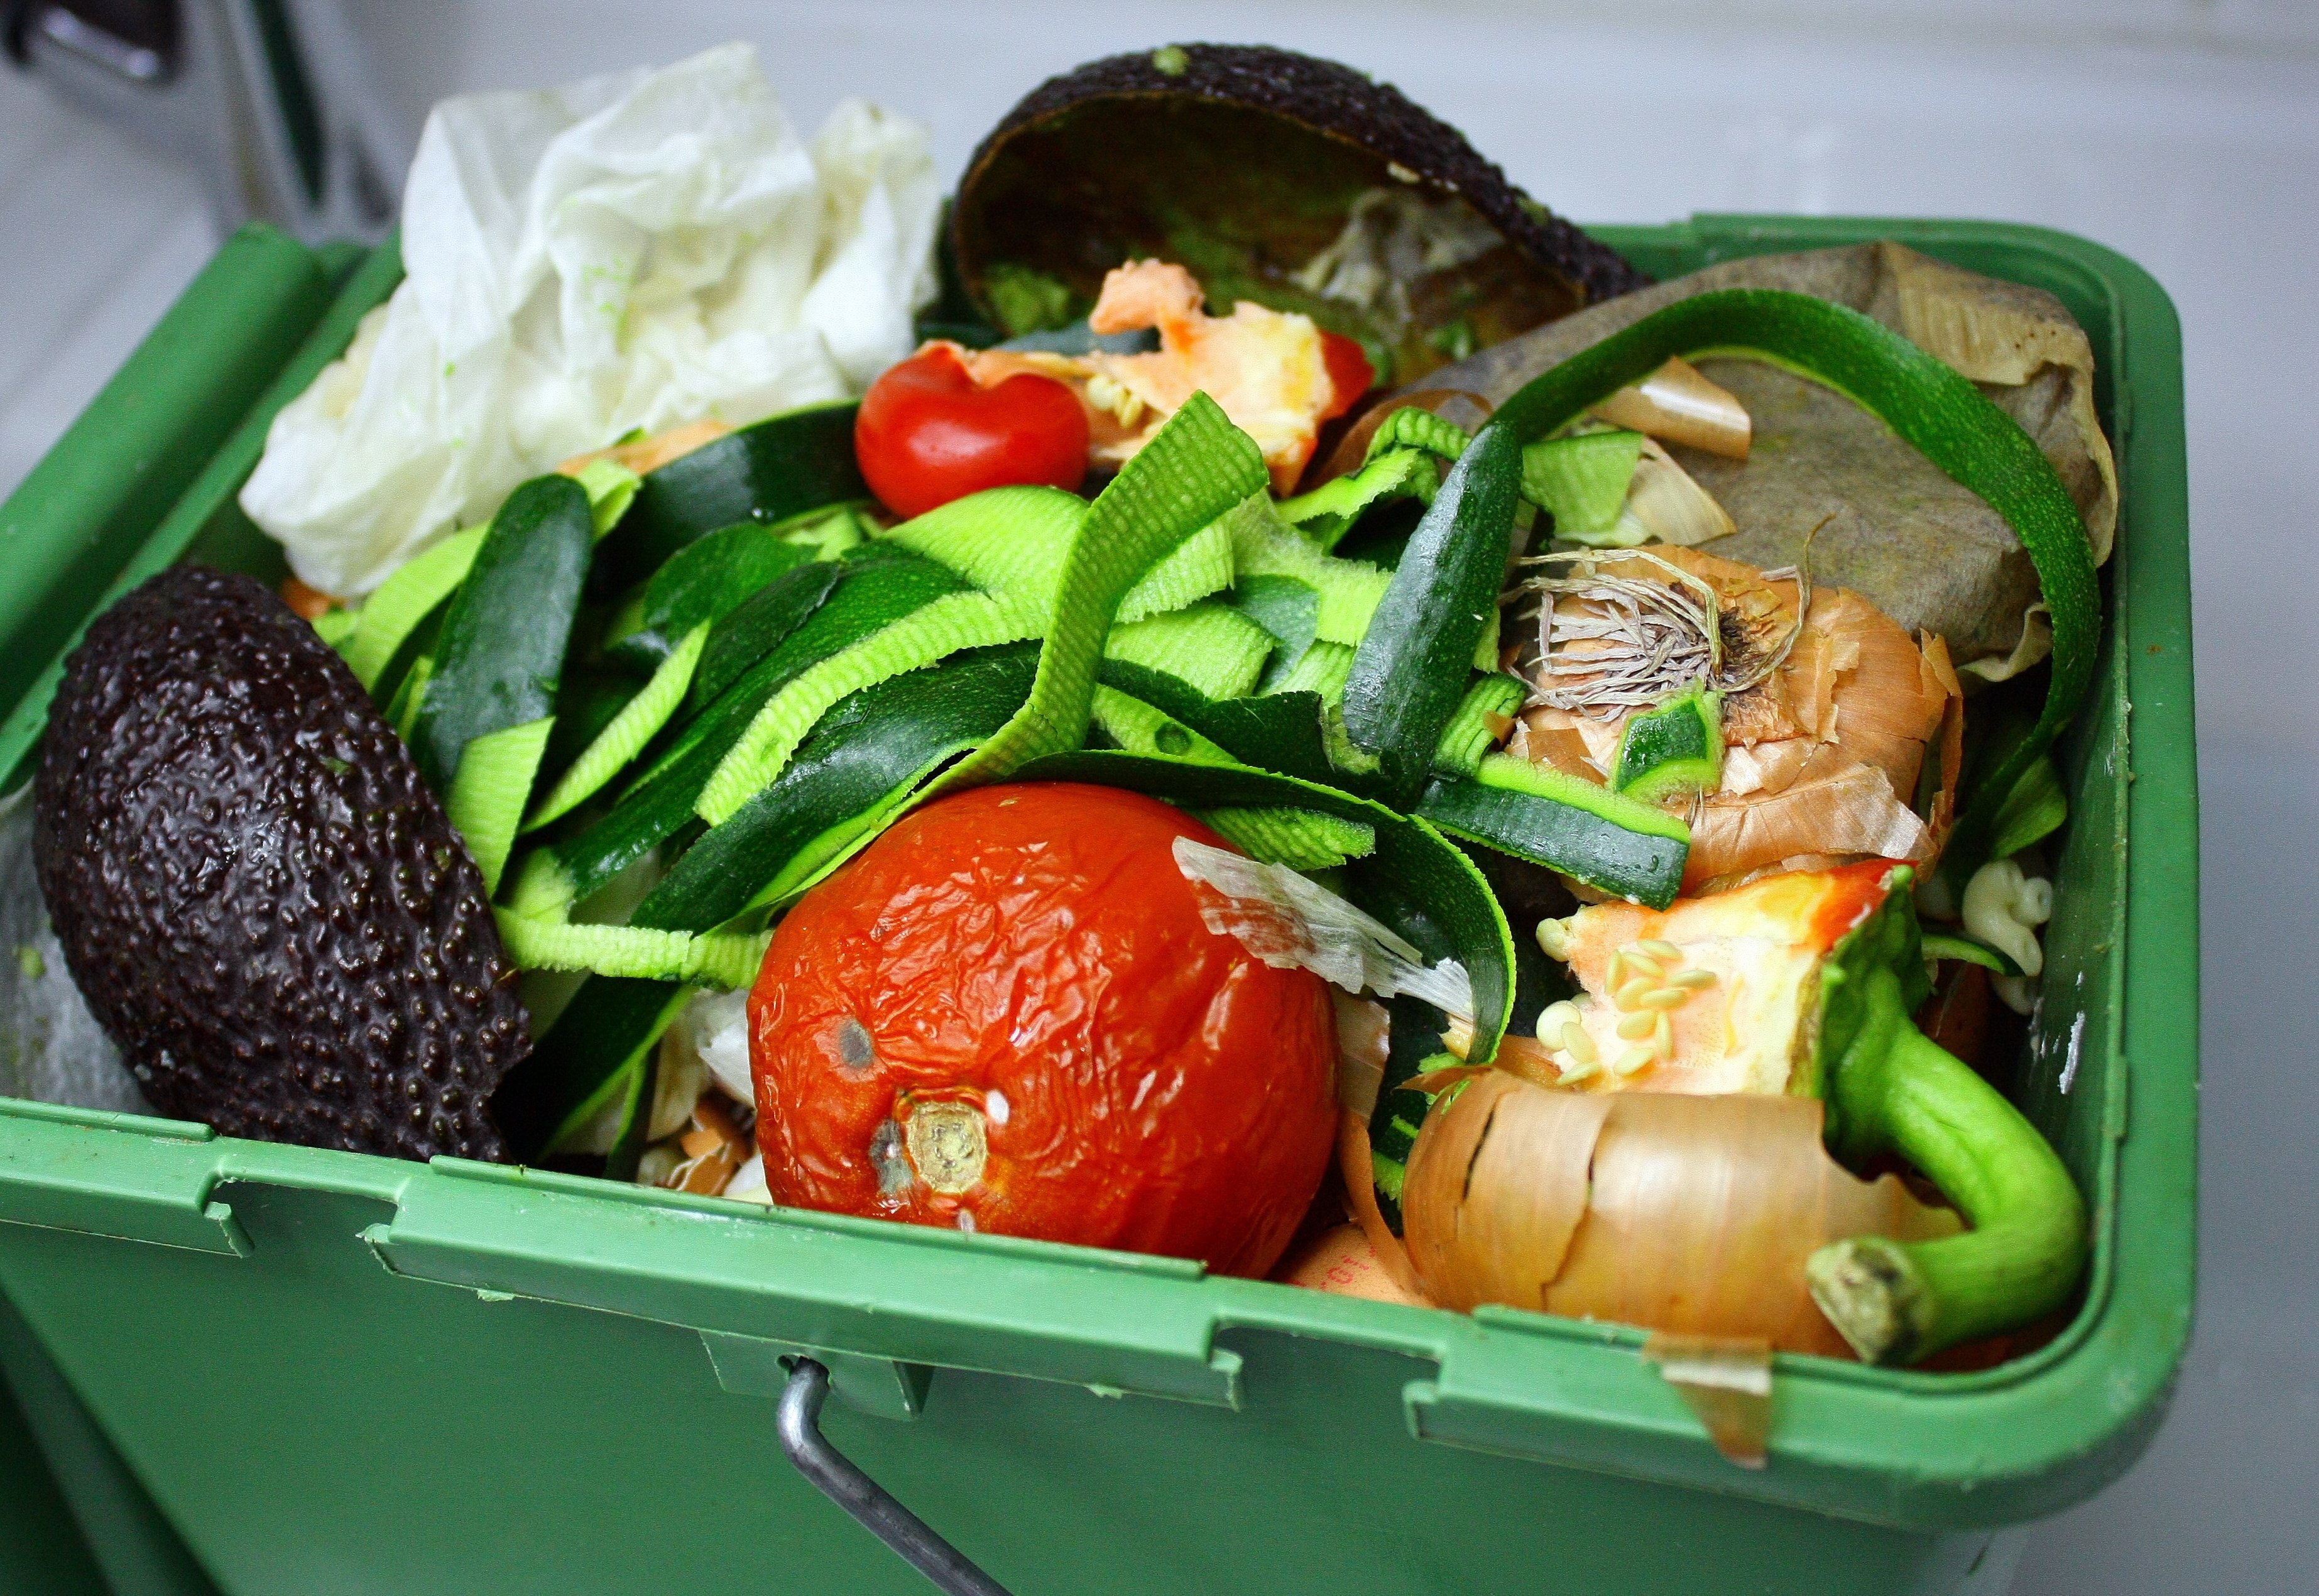 Recycling Food Waste Benefits